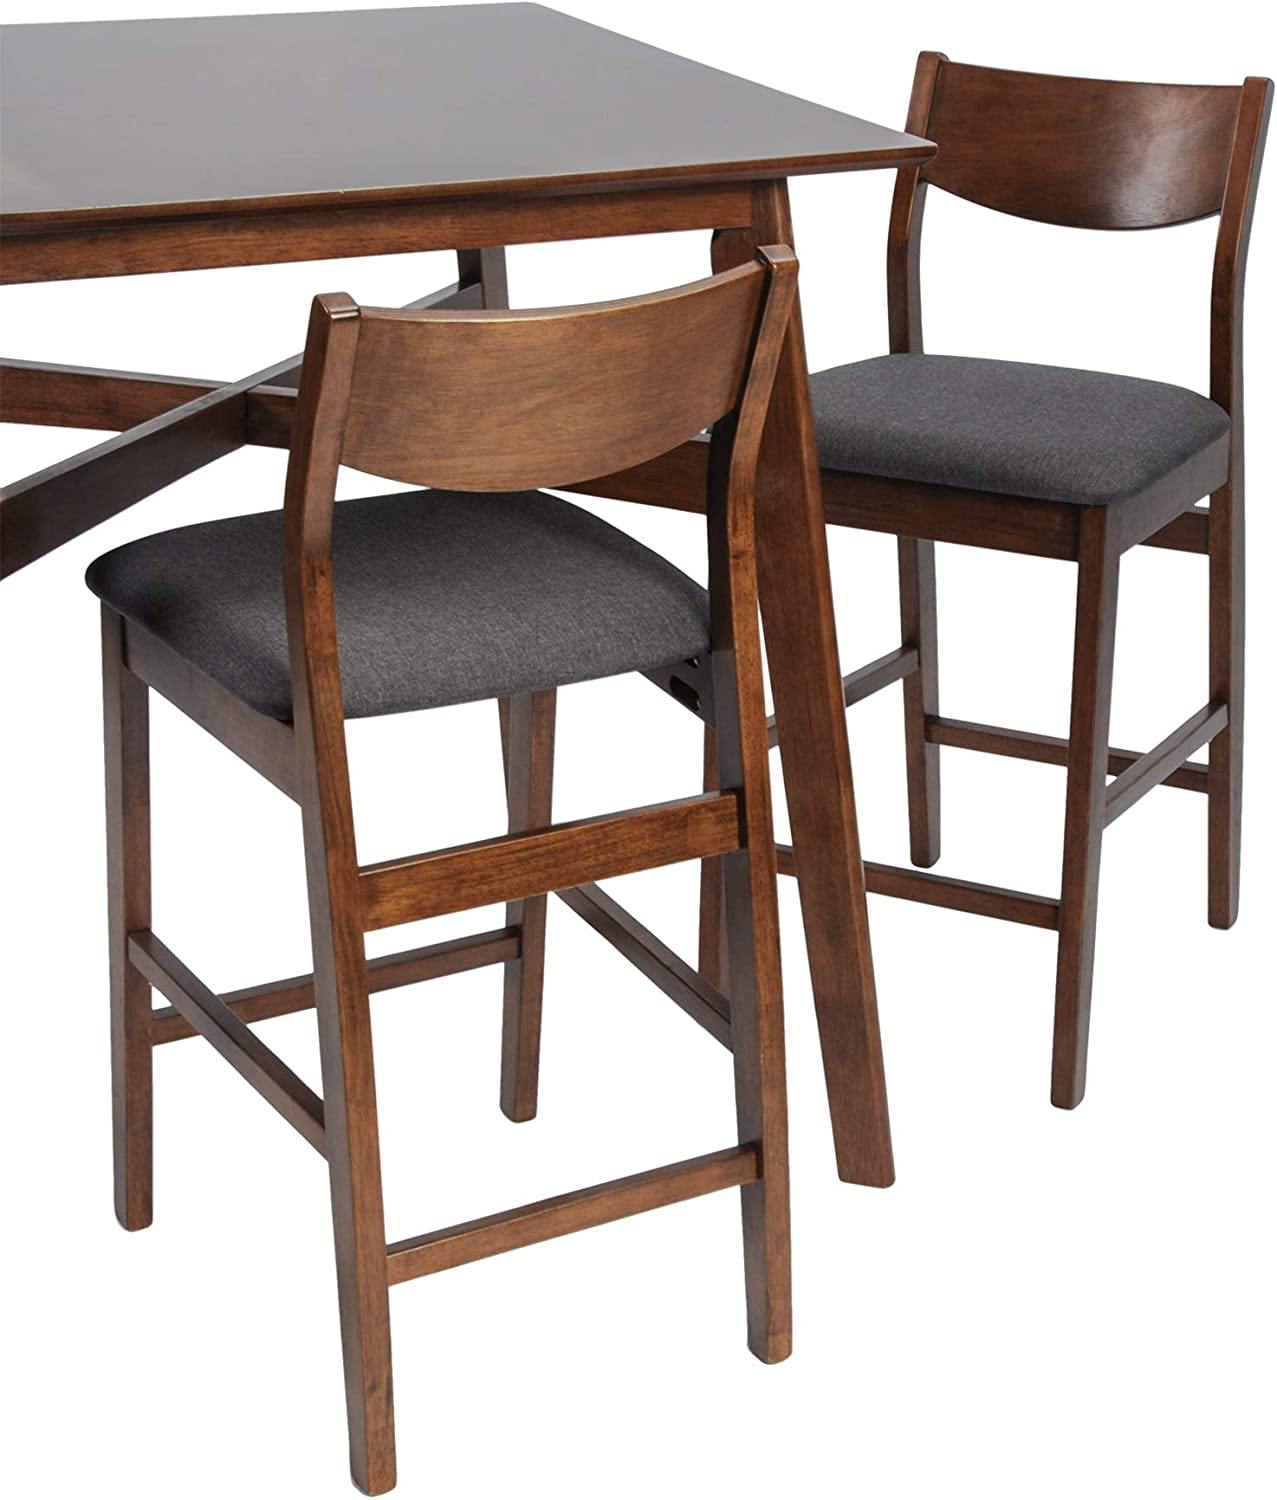 24” Counter Height Chairs Upholstered Dining Chair Bar Stools, Solid Wood Leg, Soft Cushion, Pub Height, Ergonomics Back, Set of 2 - Bosonshop